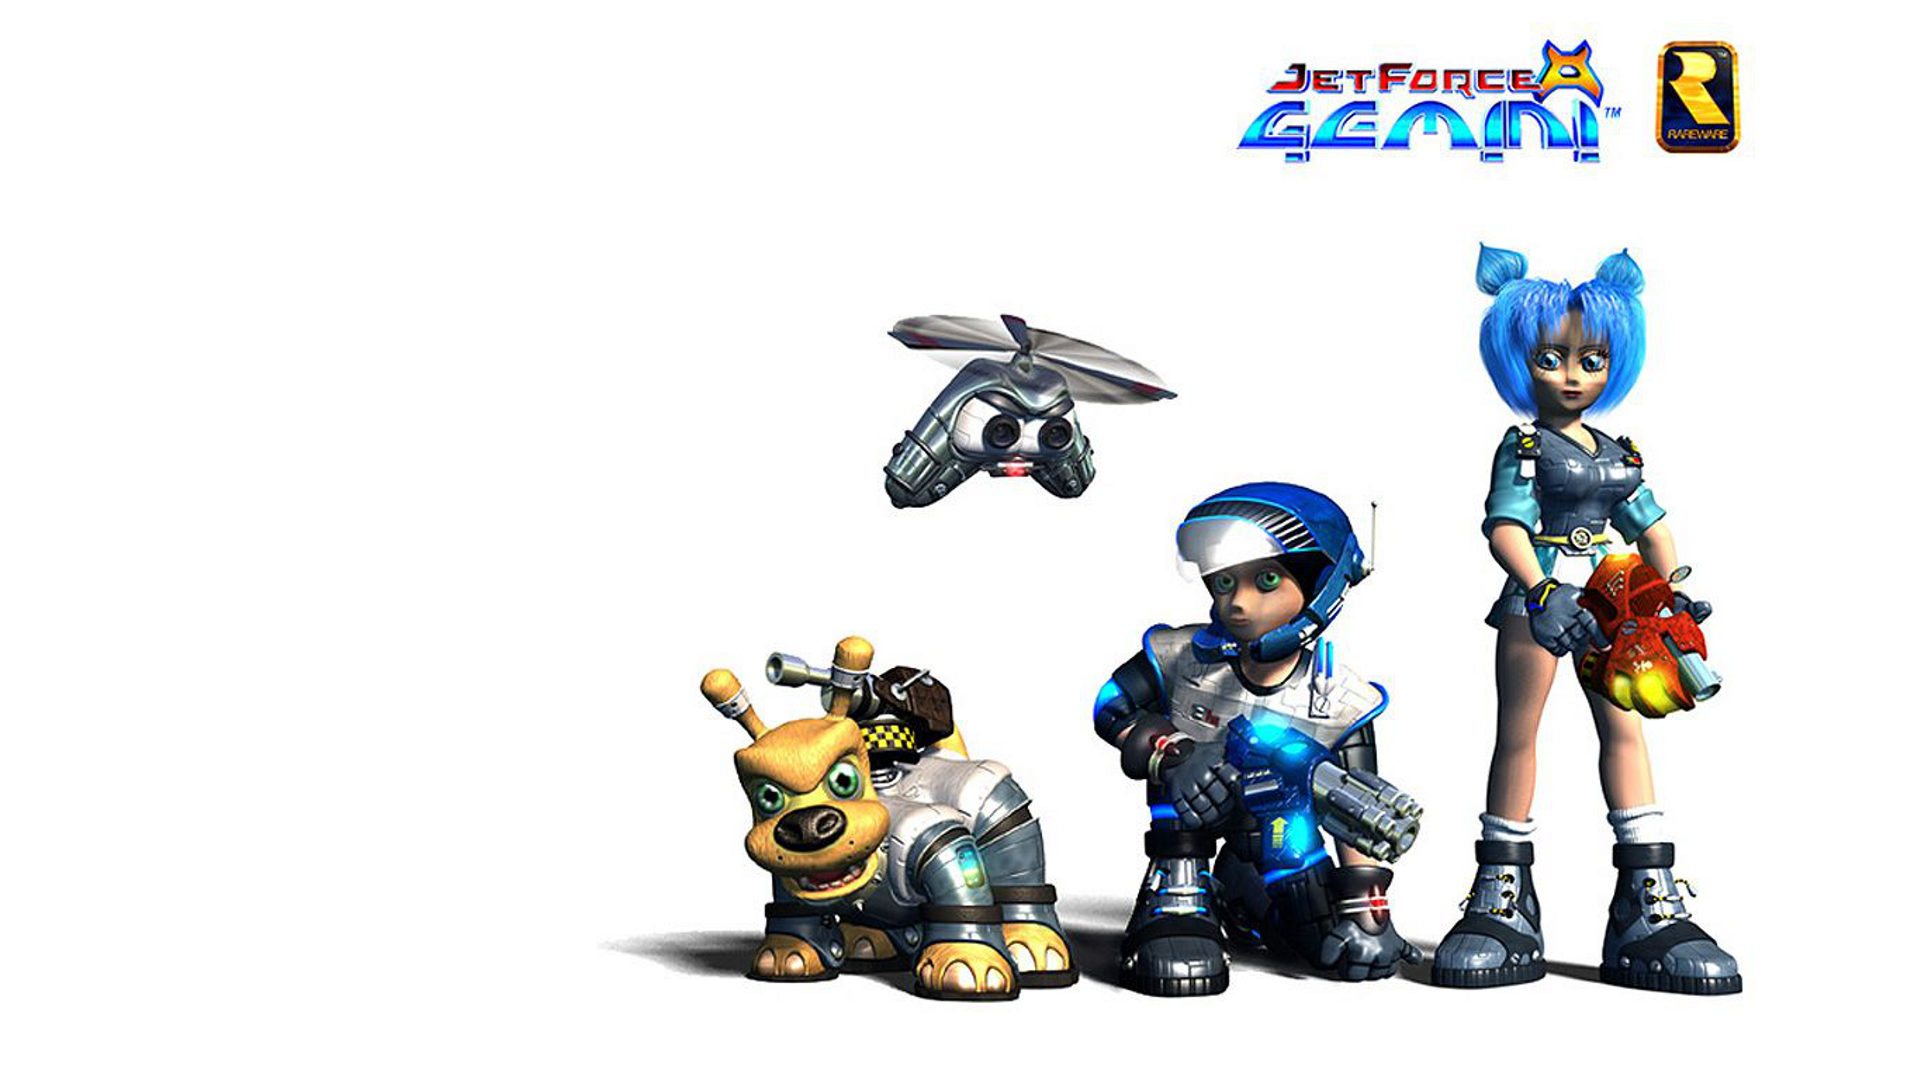 General 1920x1080 video games simple background Jet Force Gemini white background